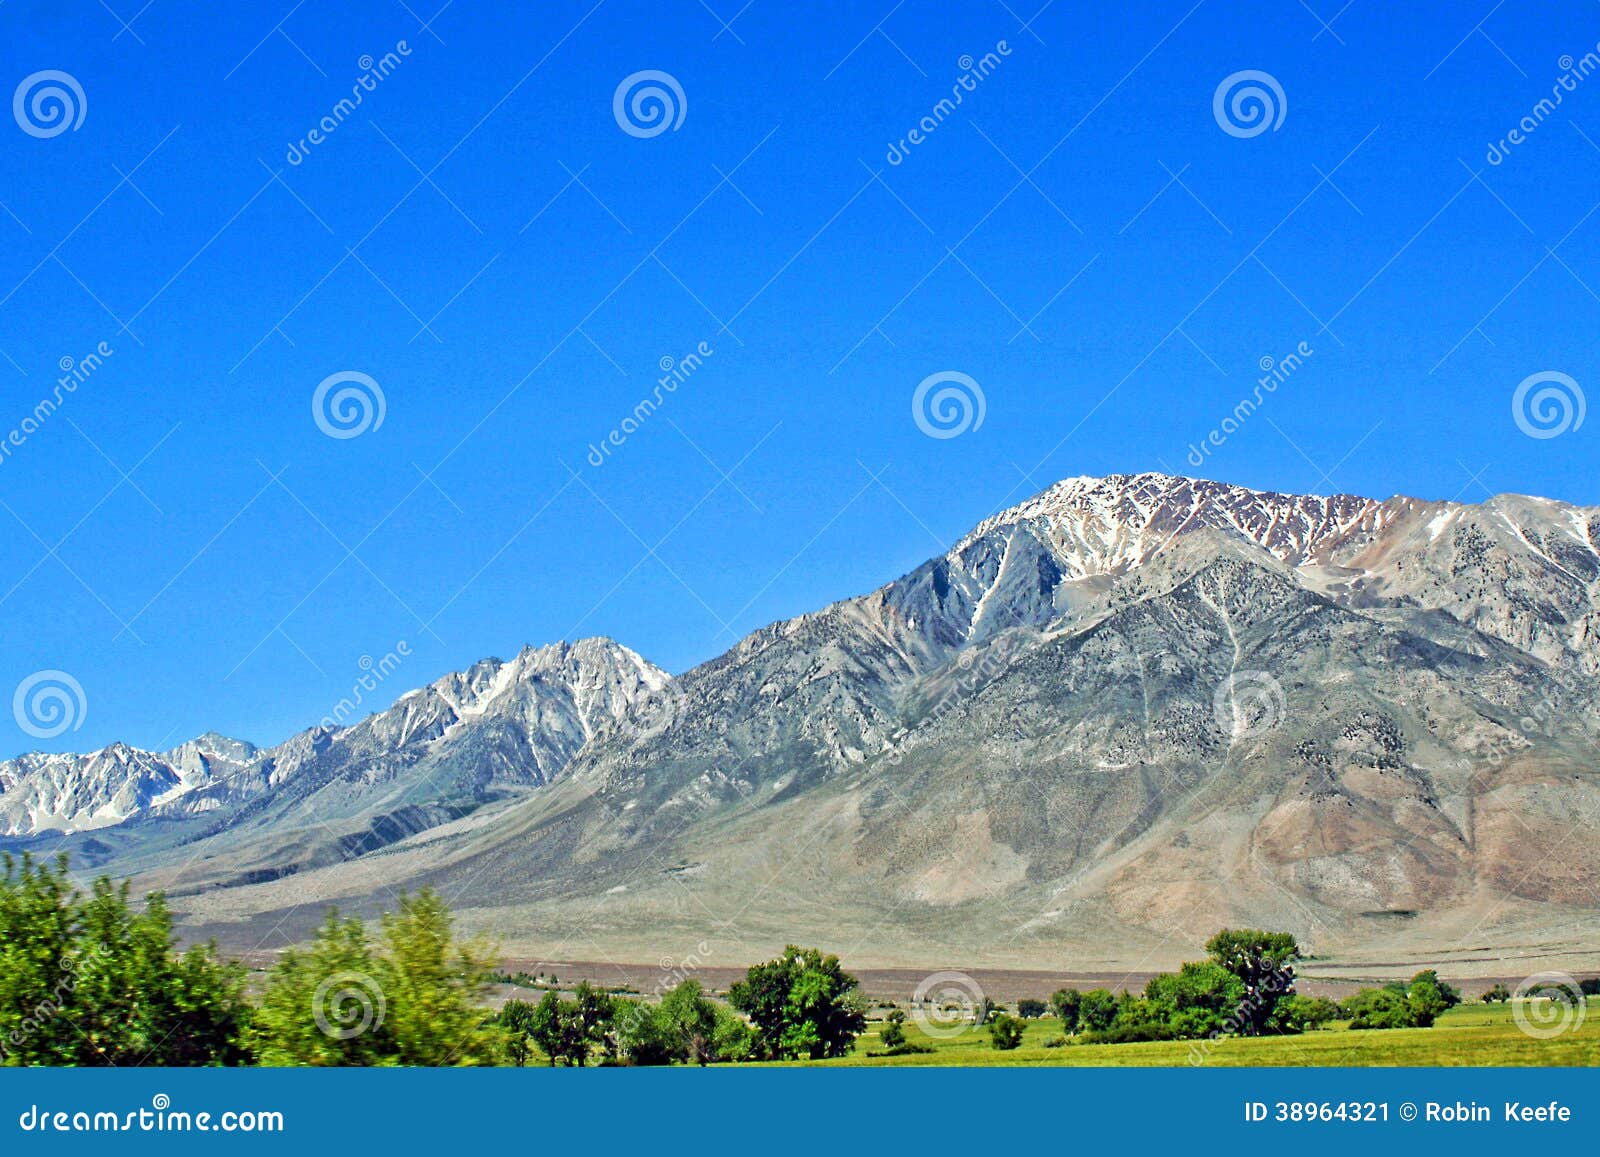 Landscape With Snow Capped Mountains Stock Image Image Of Landscape